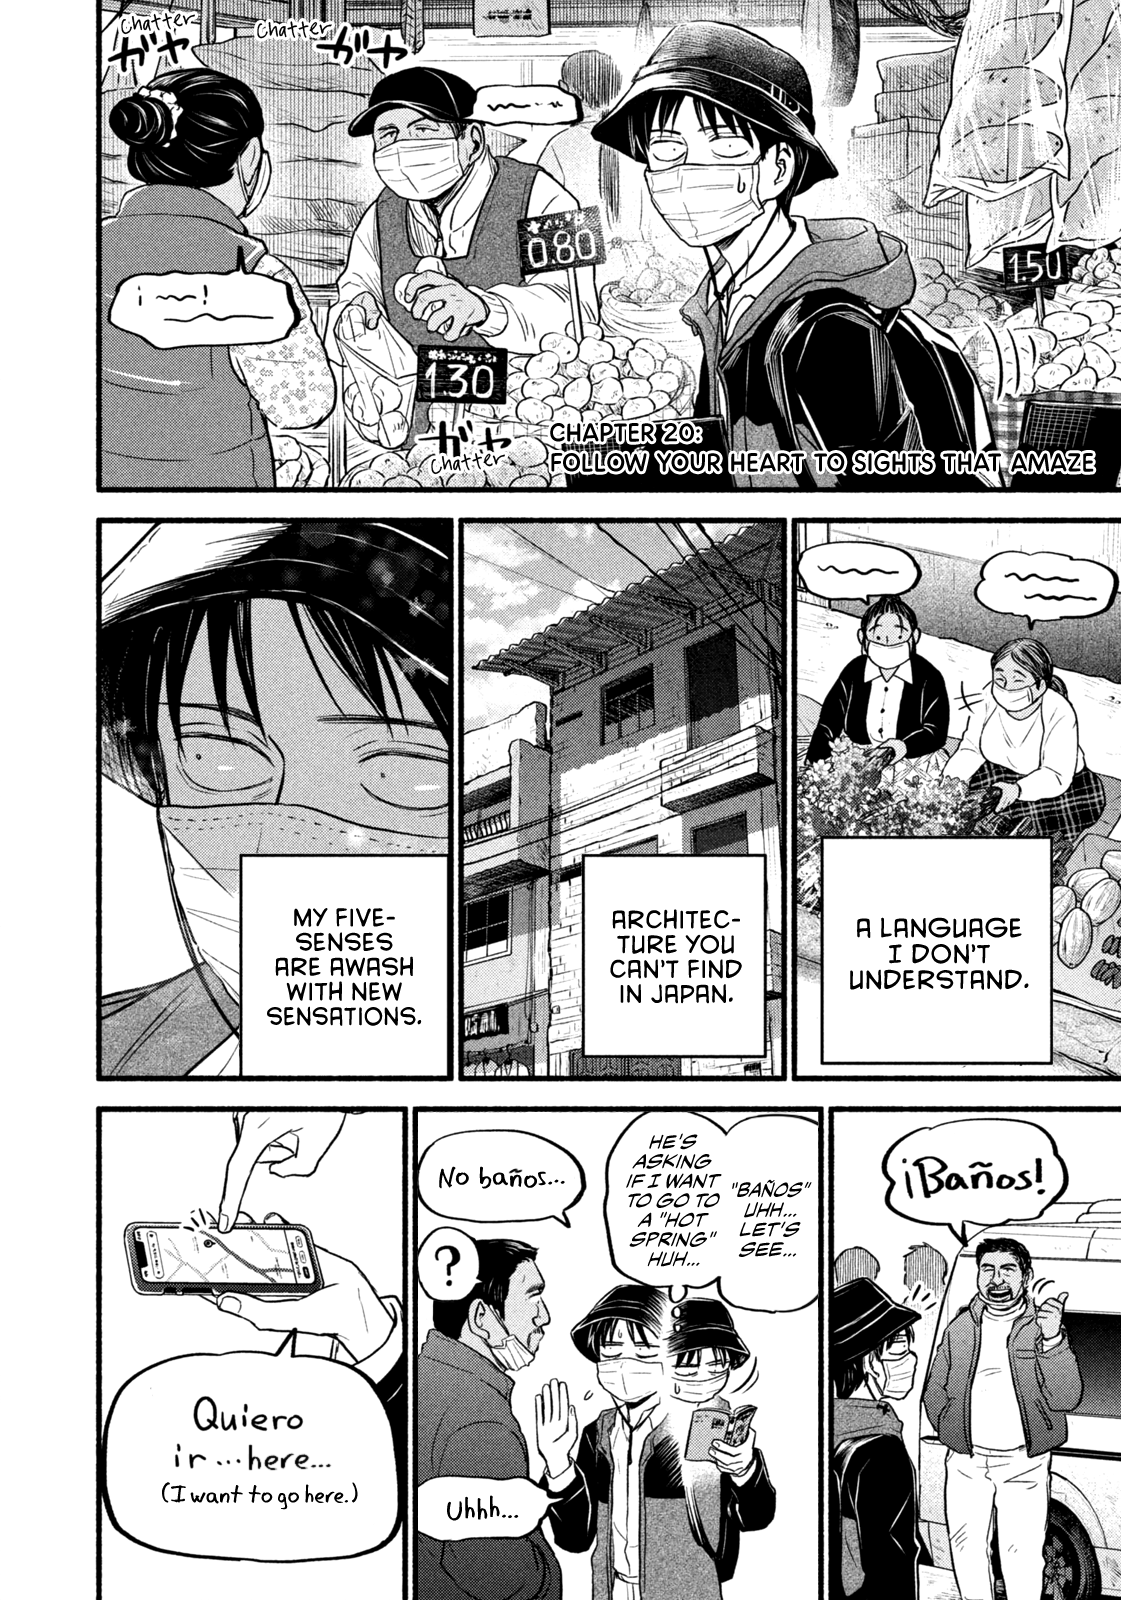 Telework Yotabanashi Chapter 20: Follow Your Heart To Sights That Amaze - Picture 2